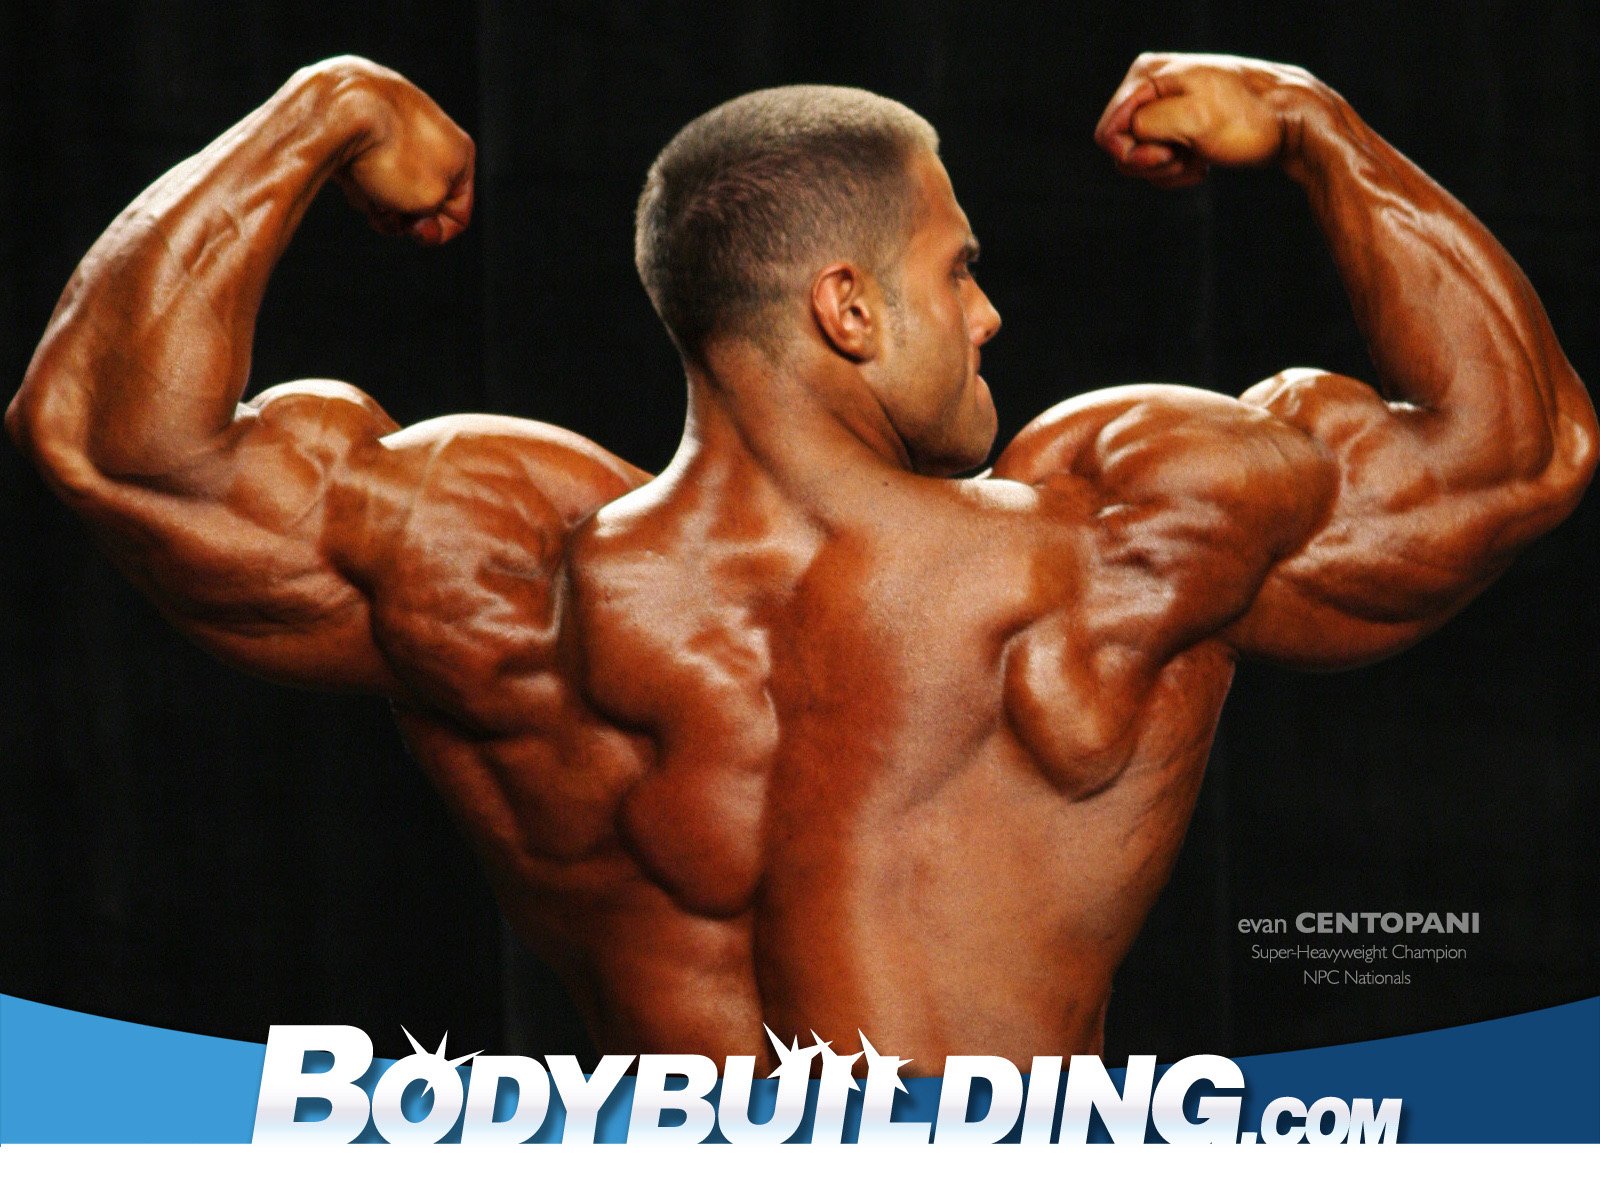 Are You Making These 3 Bodybuilding Fails?